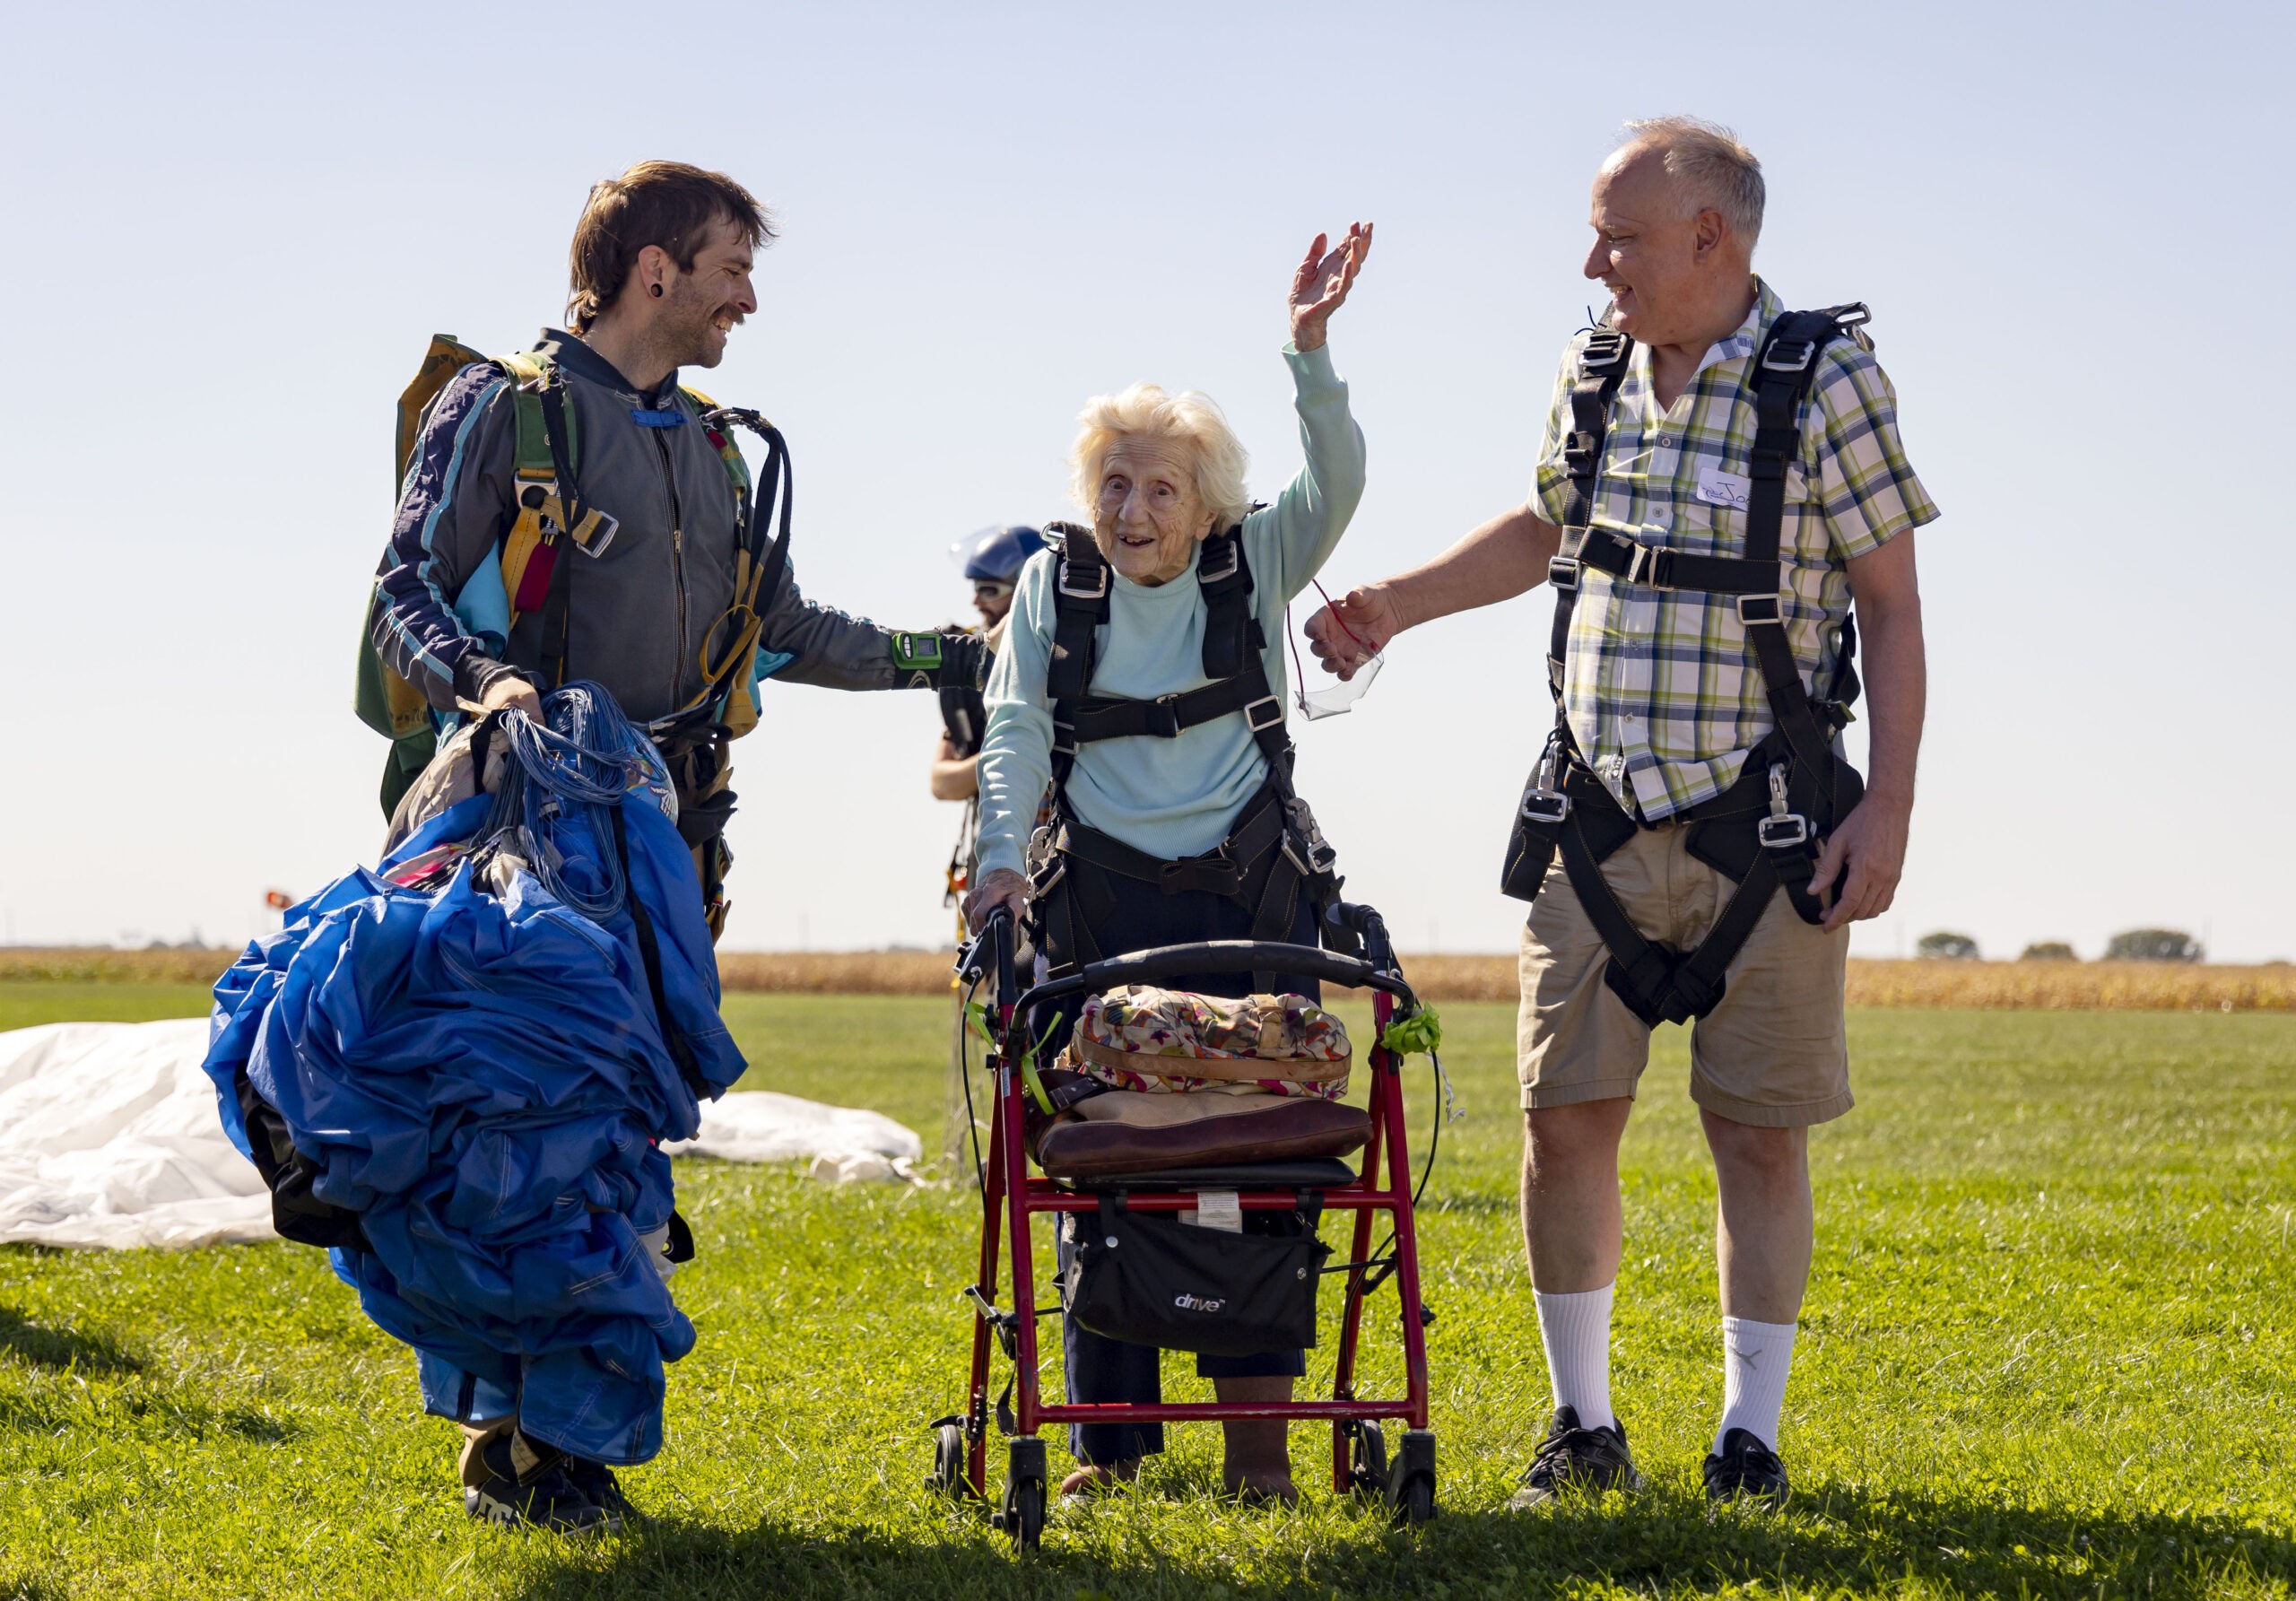 Record-Breaking Skydive: 104-Year-Old Soars To New Heights - ARAB TIMES ...